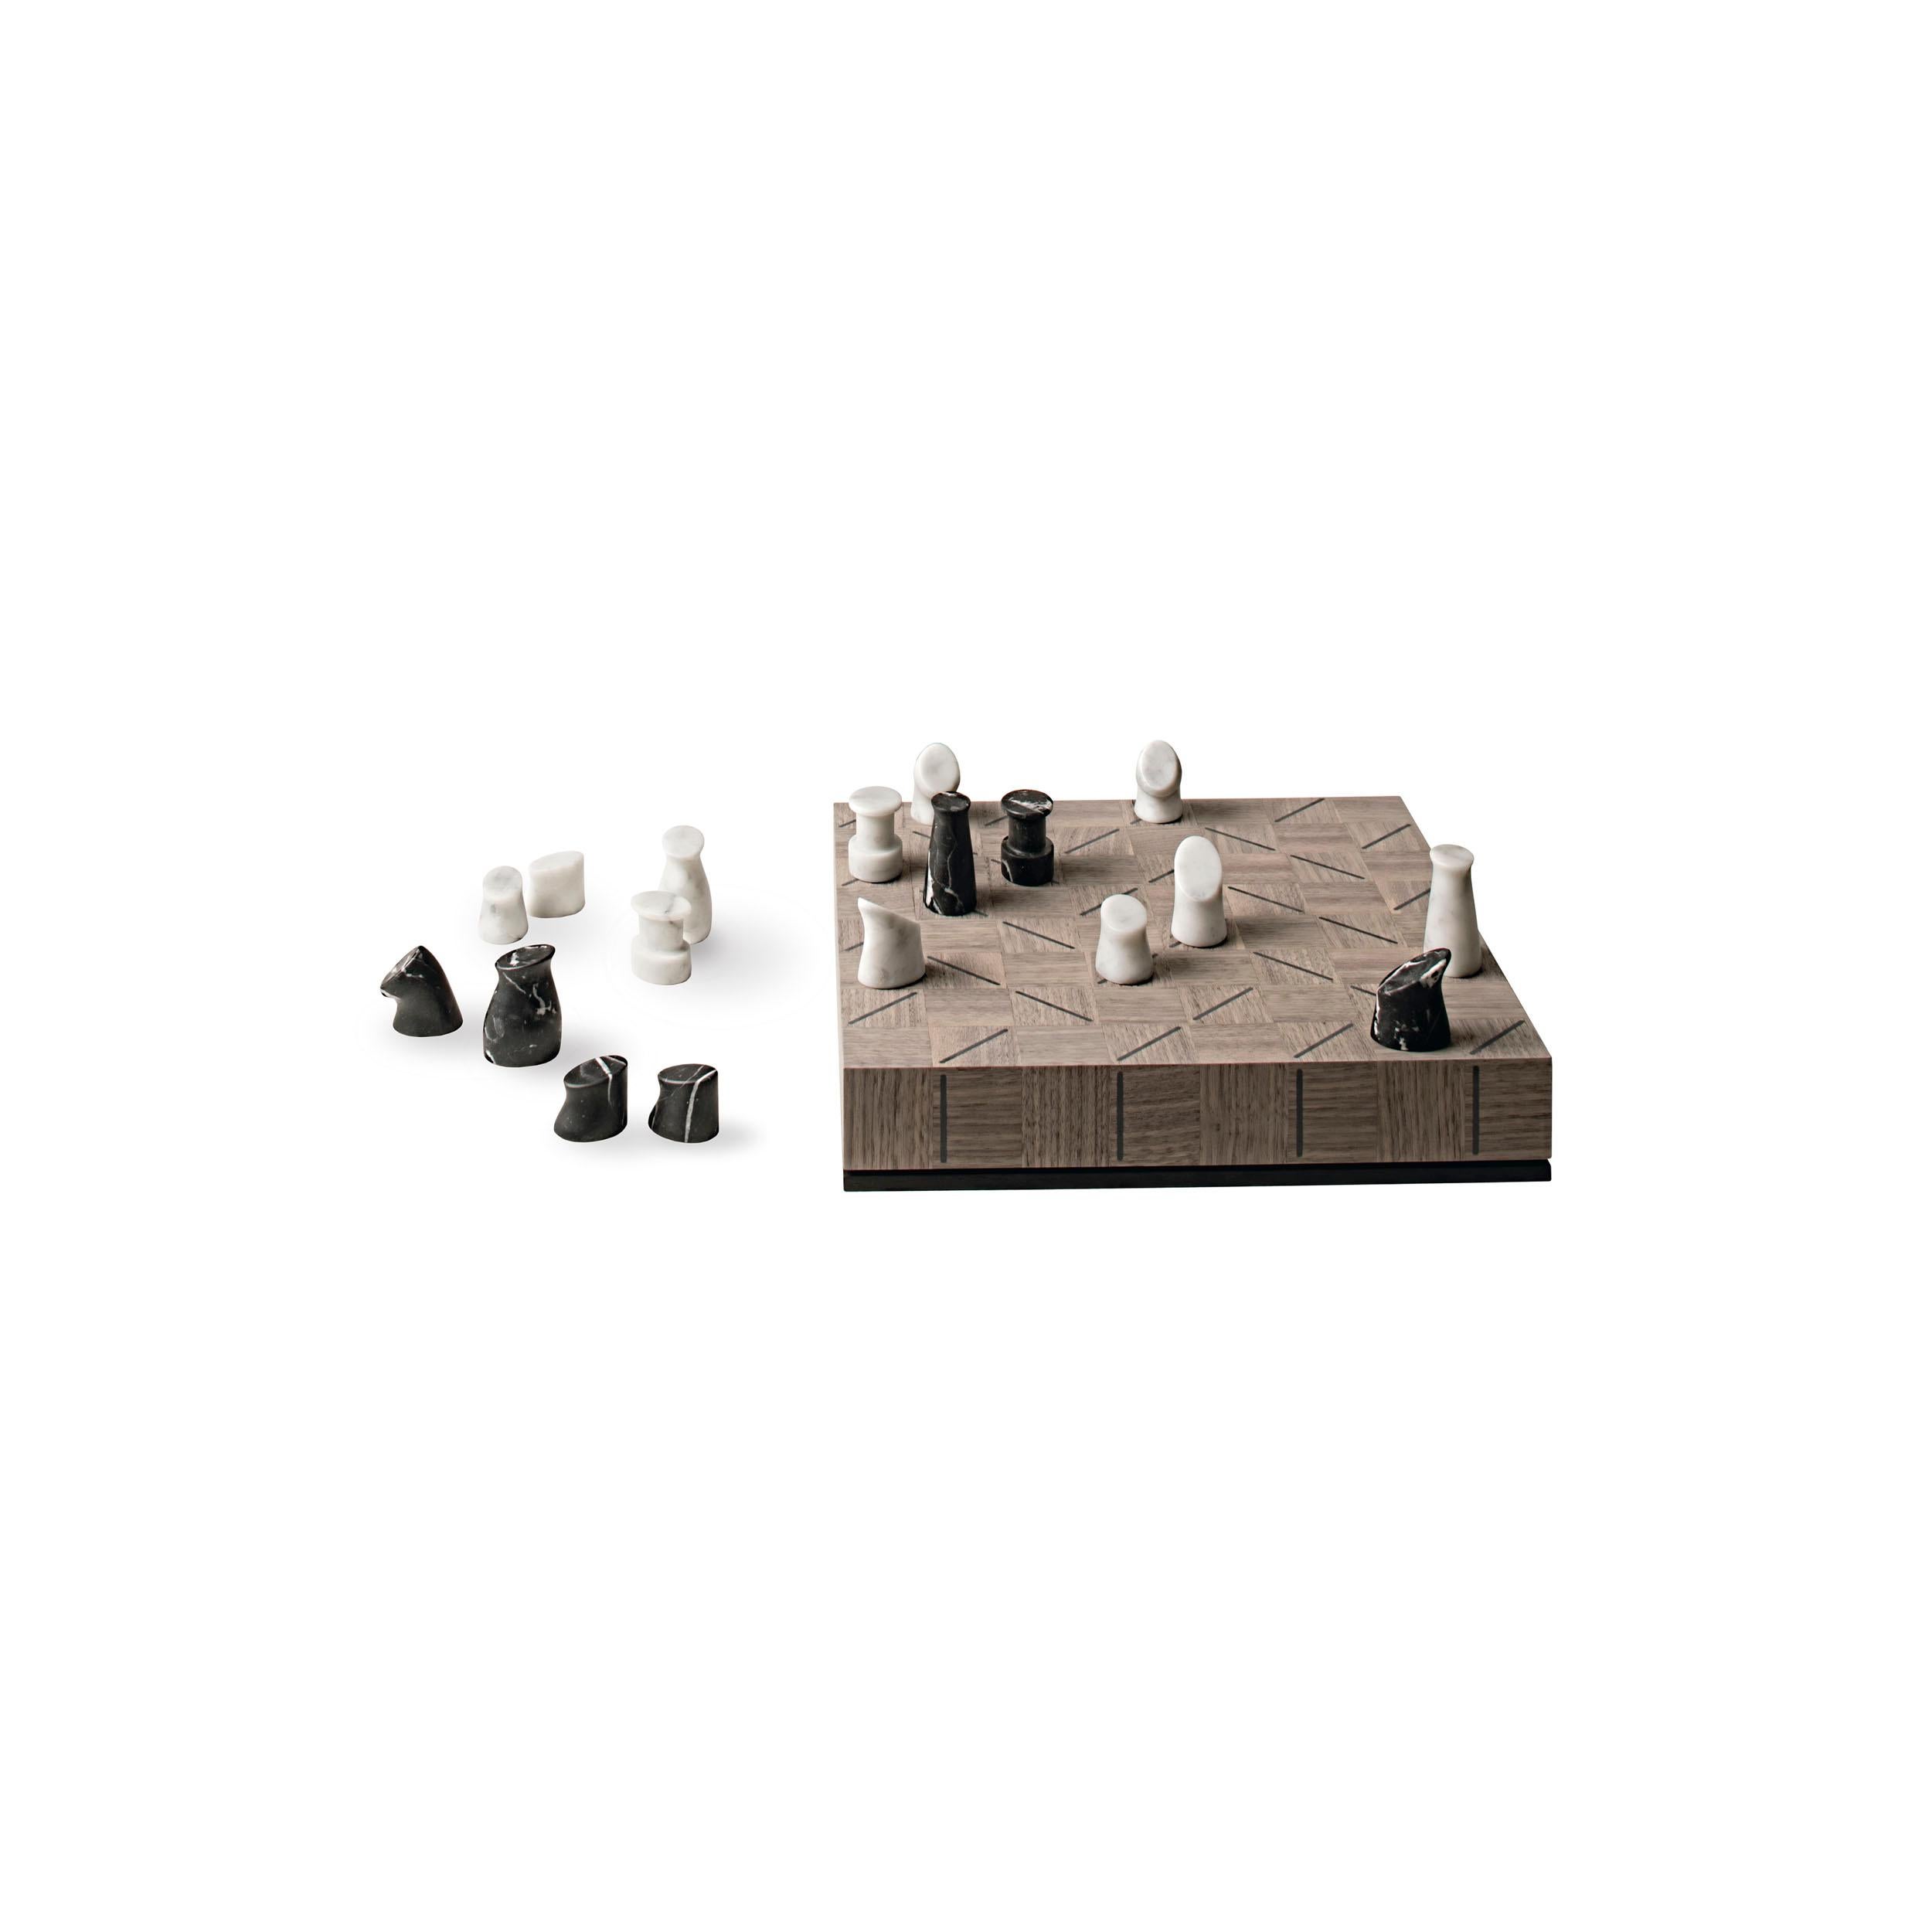 Checkerboard 38 x 38 cm in canaletto walnut with gray finish (fin.2W).
The chess pieces, made of calacatta and black marble, are contained in the leather-lined interior.
It is an objet d'art not only because of its reinterpretation of the classic